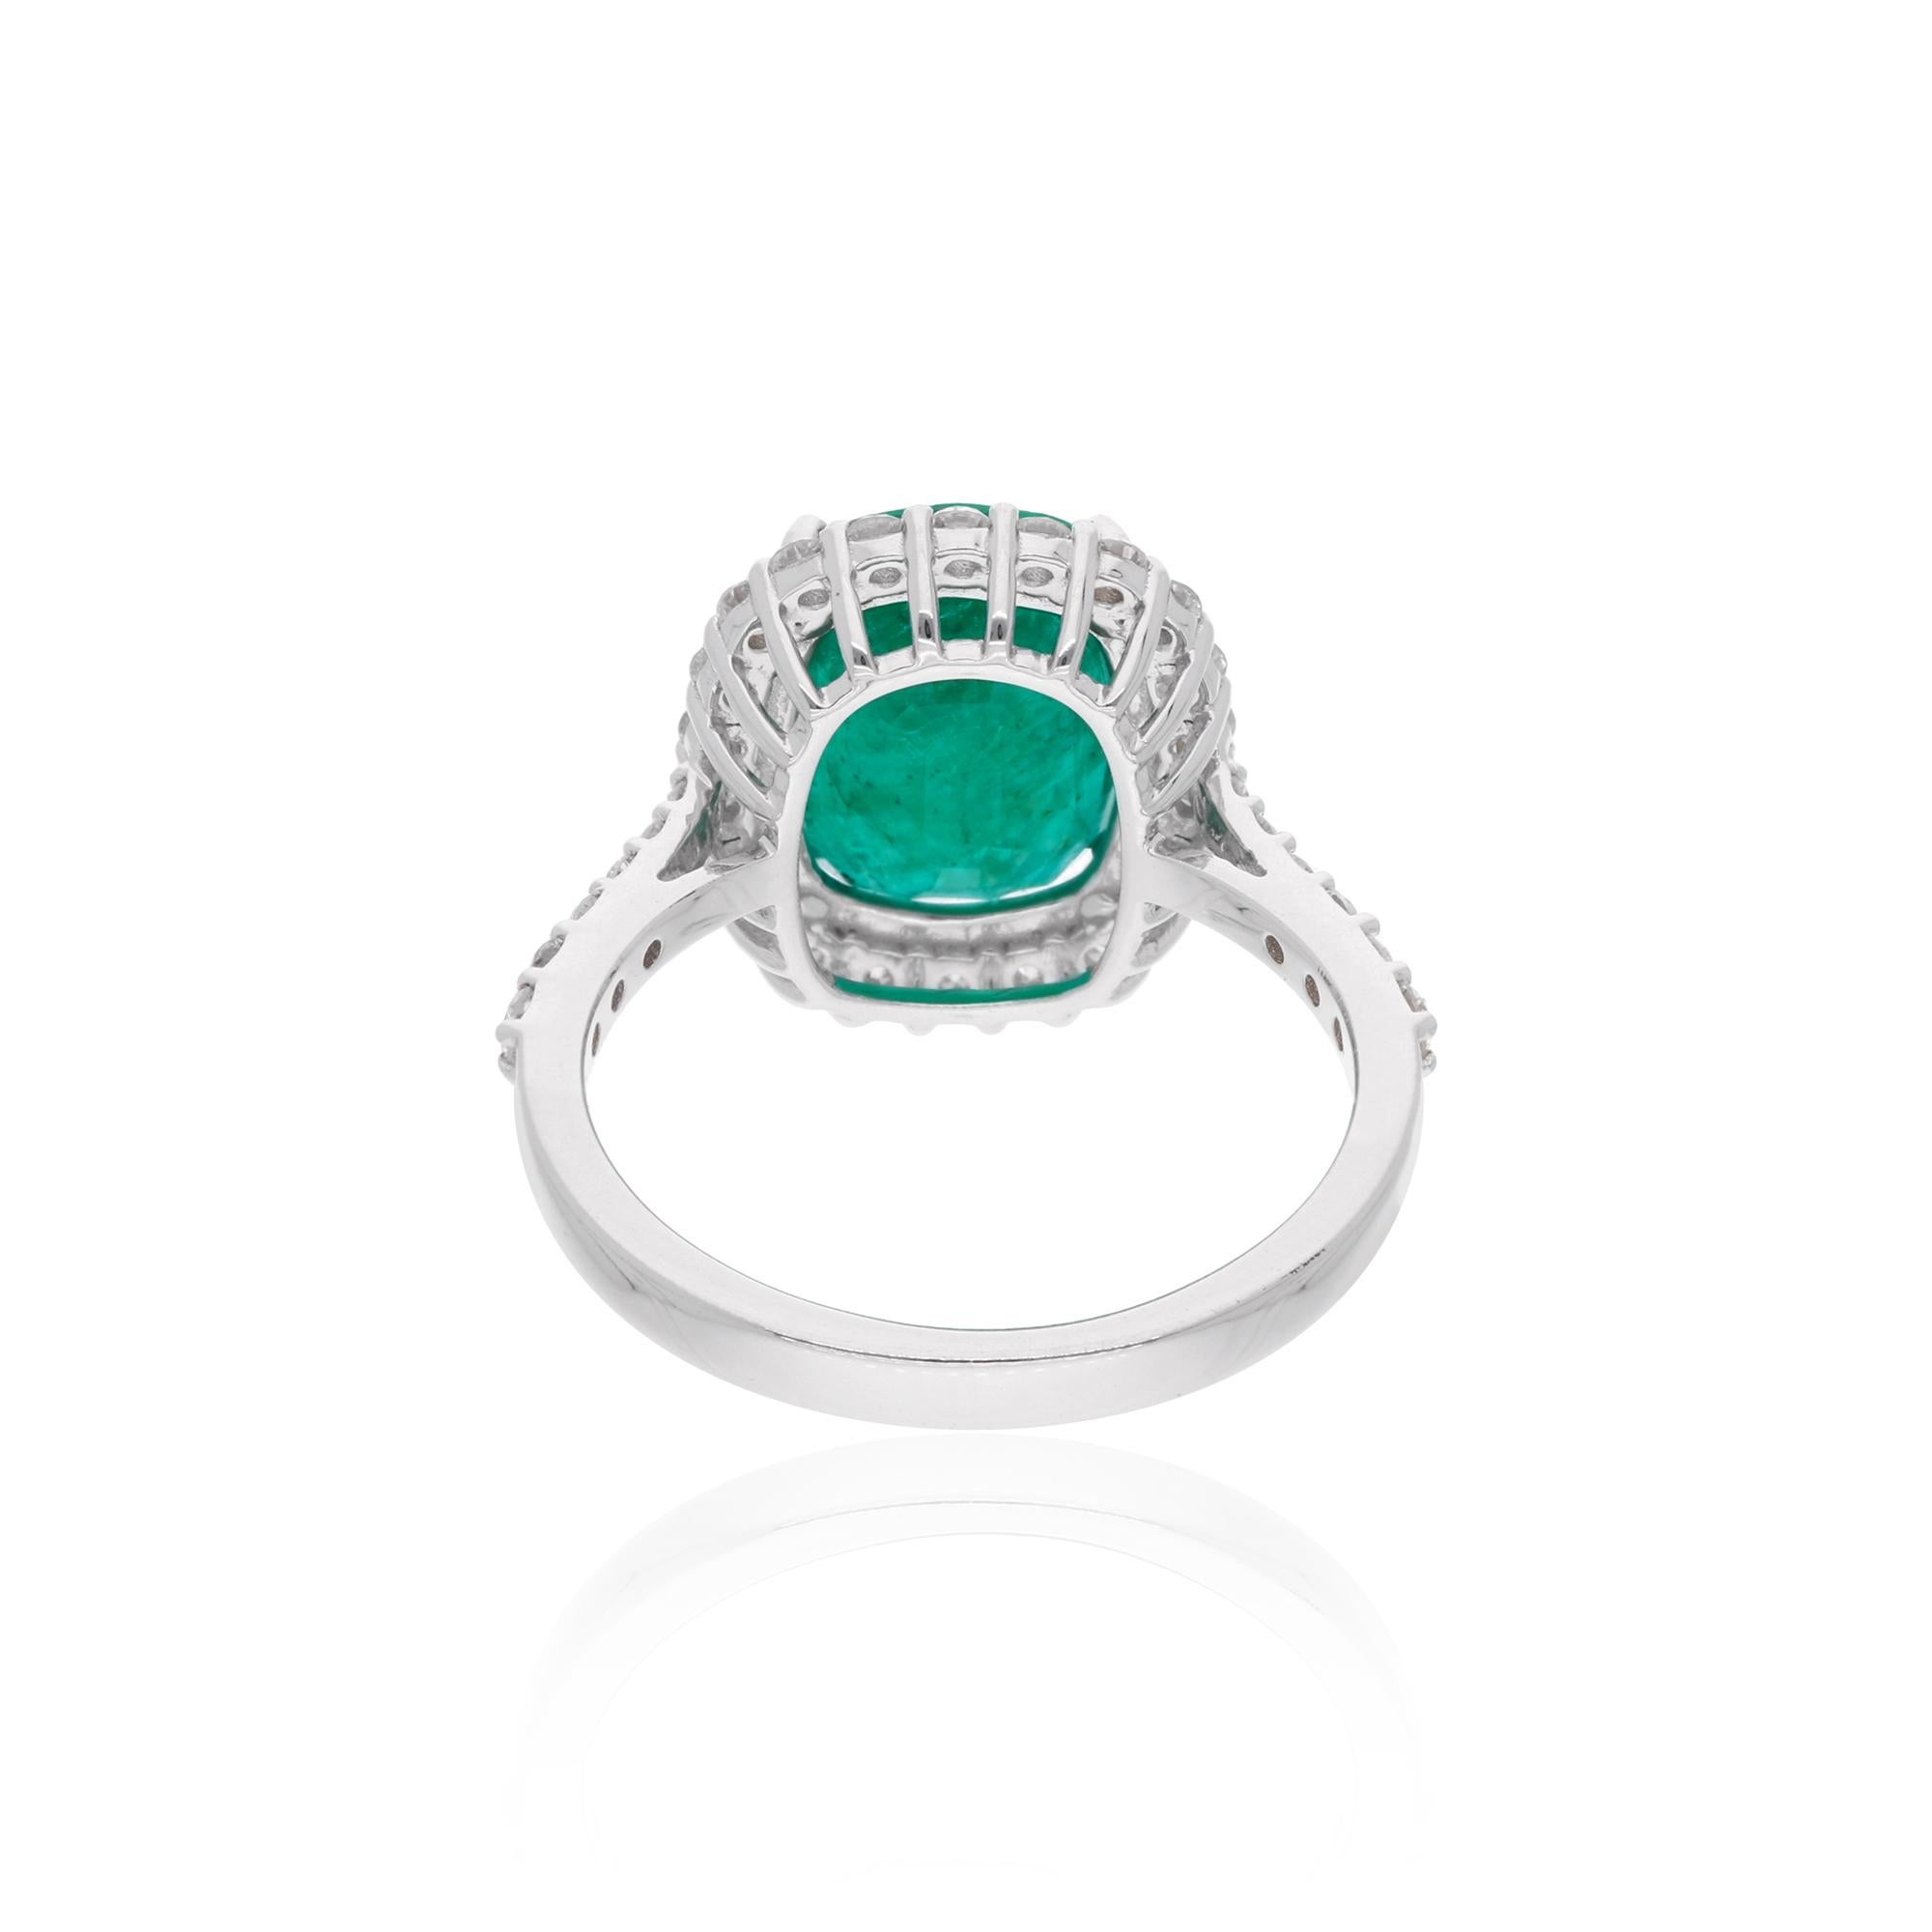 Item Code :- SER-23094 (14k)
Gross Wt. :- 4.03 gm
14k Solid White Gold Wt. :- 3.06 gm
Natural Diamond Wt. :- 0.62 Ct. ( AVERAGE DIAMOND CLARITY SI1-SI2 & COLOR H-I )
Emerald Wt. :- 4.25 Ct.
Ring Size :- 7 US & All size available

✦